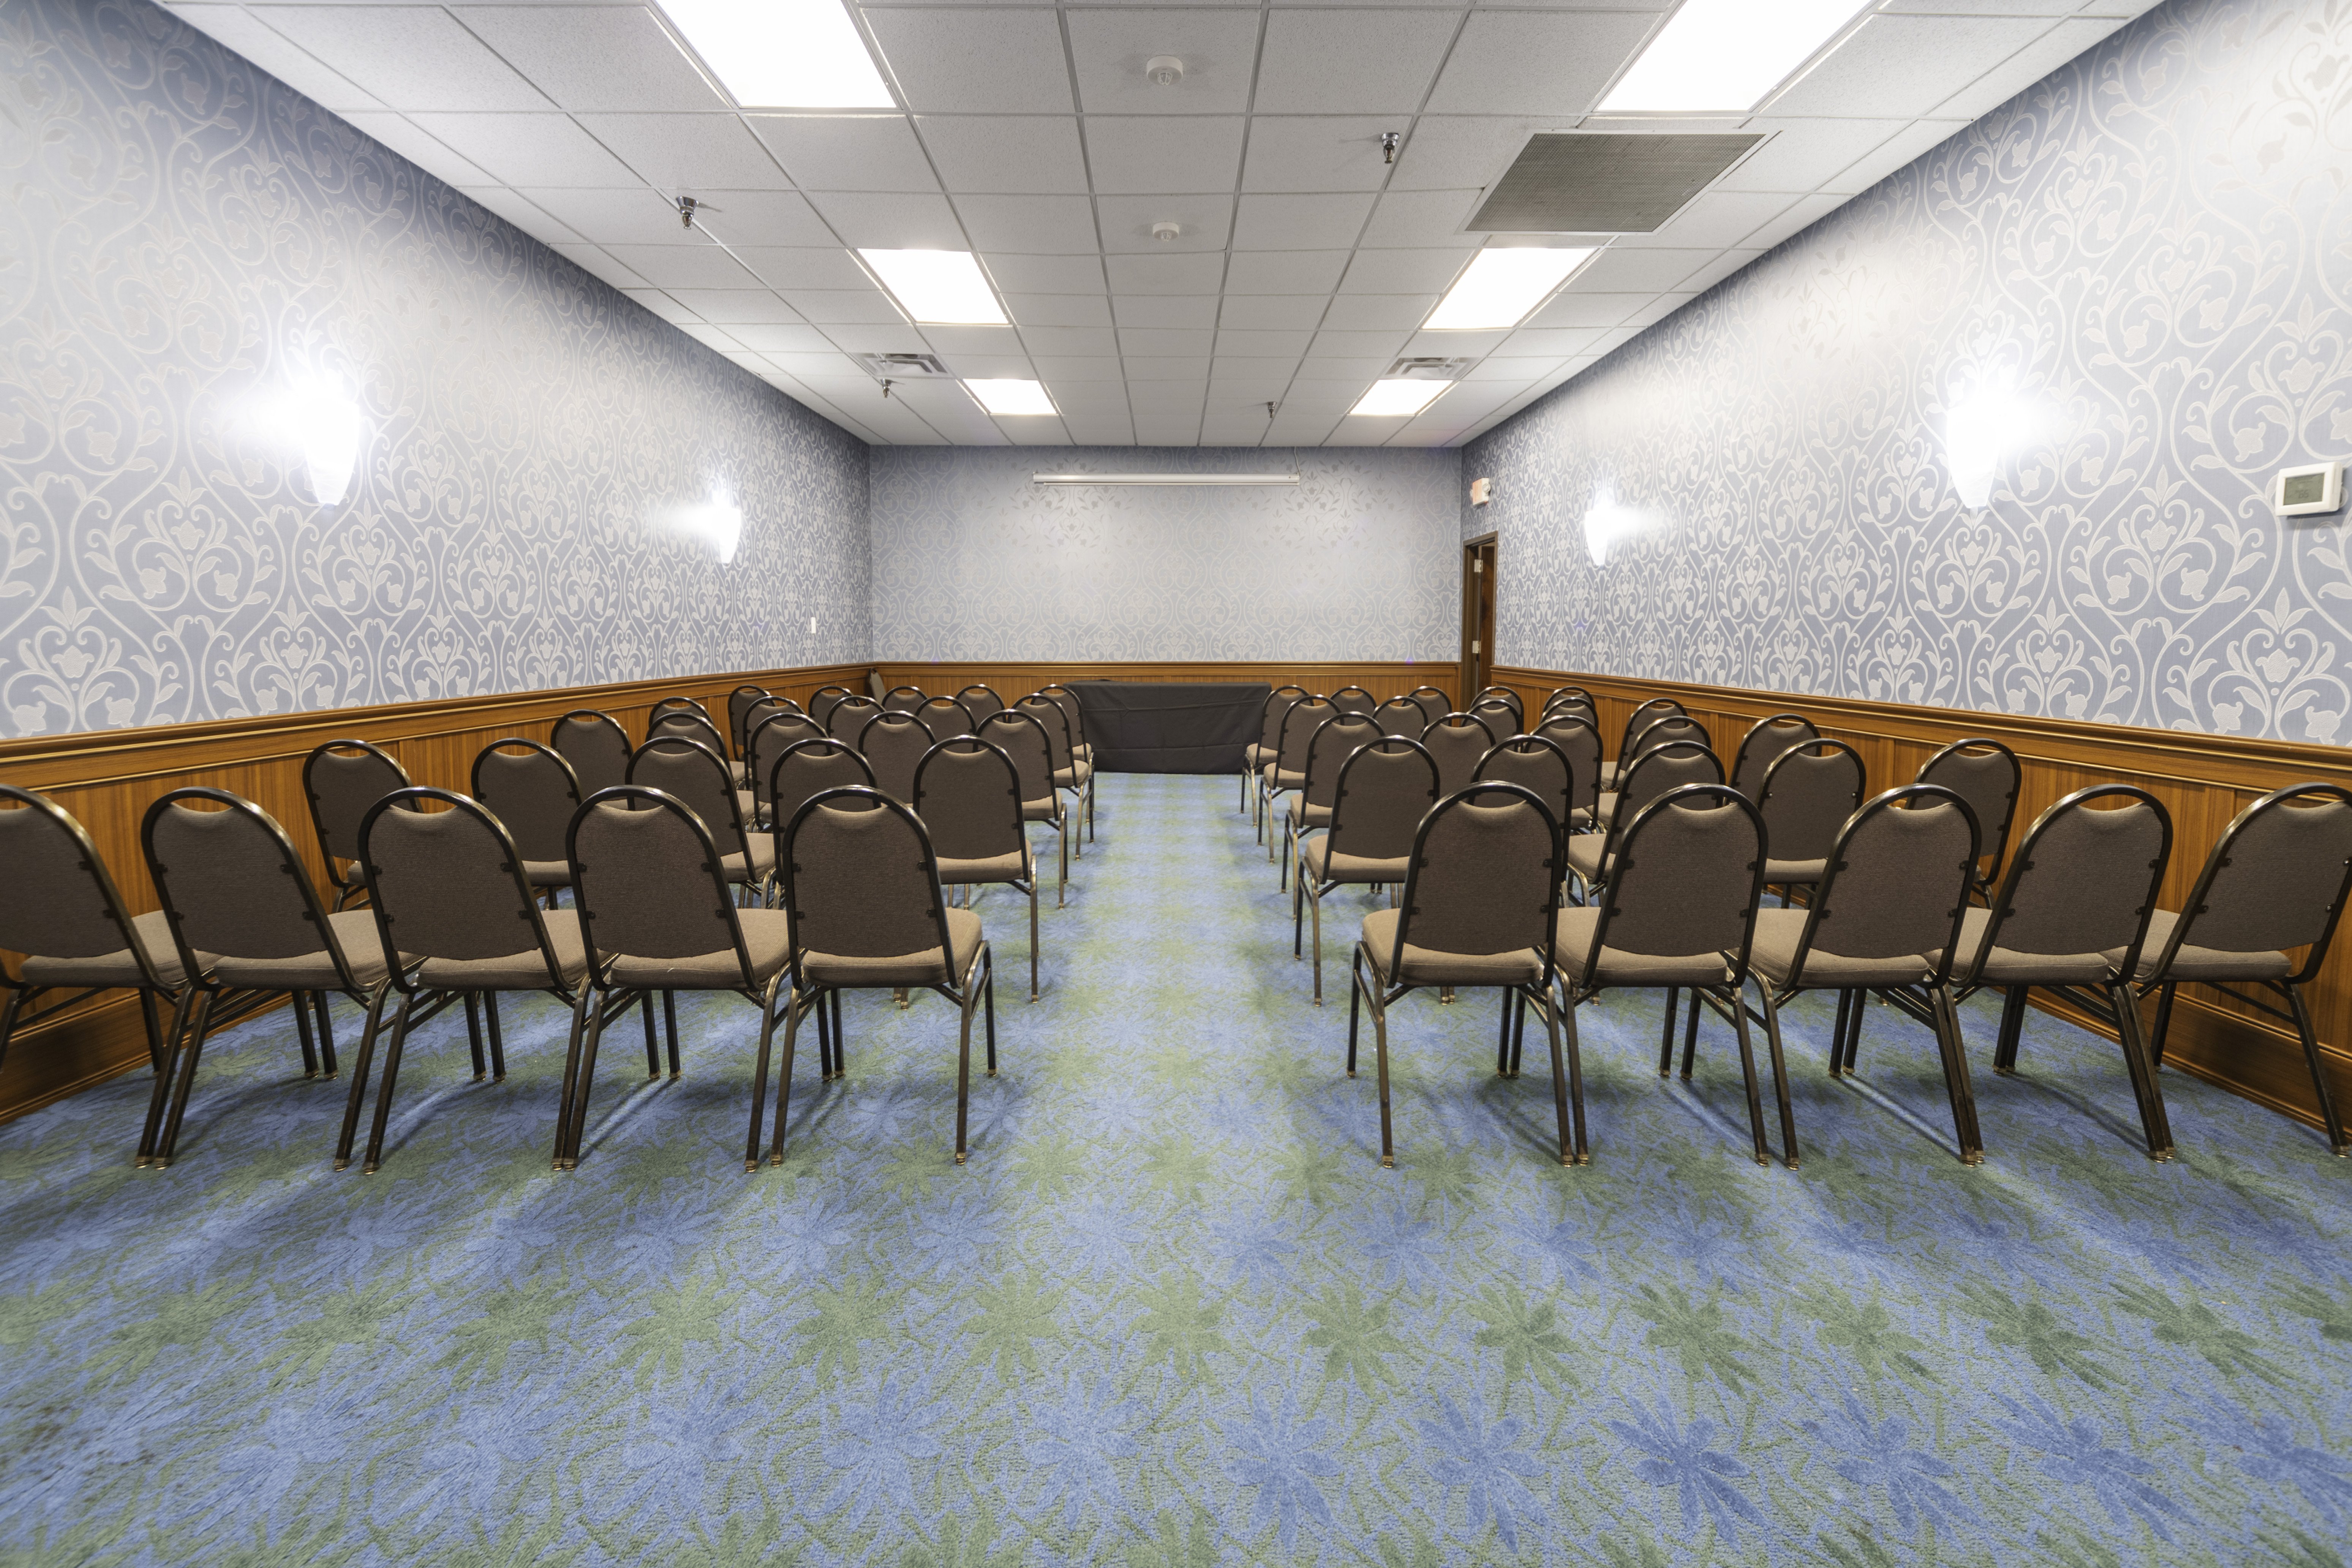 Let us take care of you and your event in our Meeting Room.